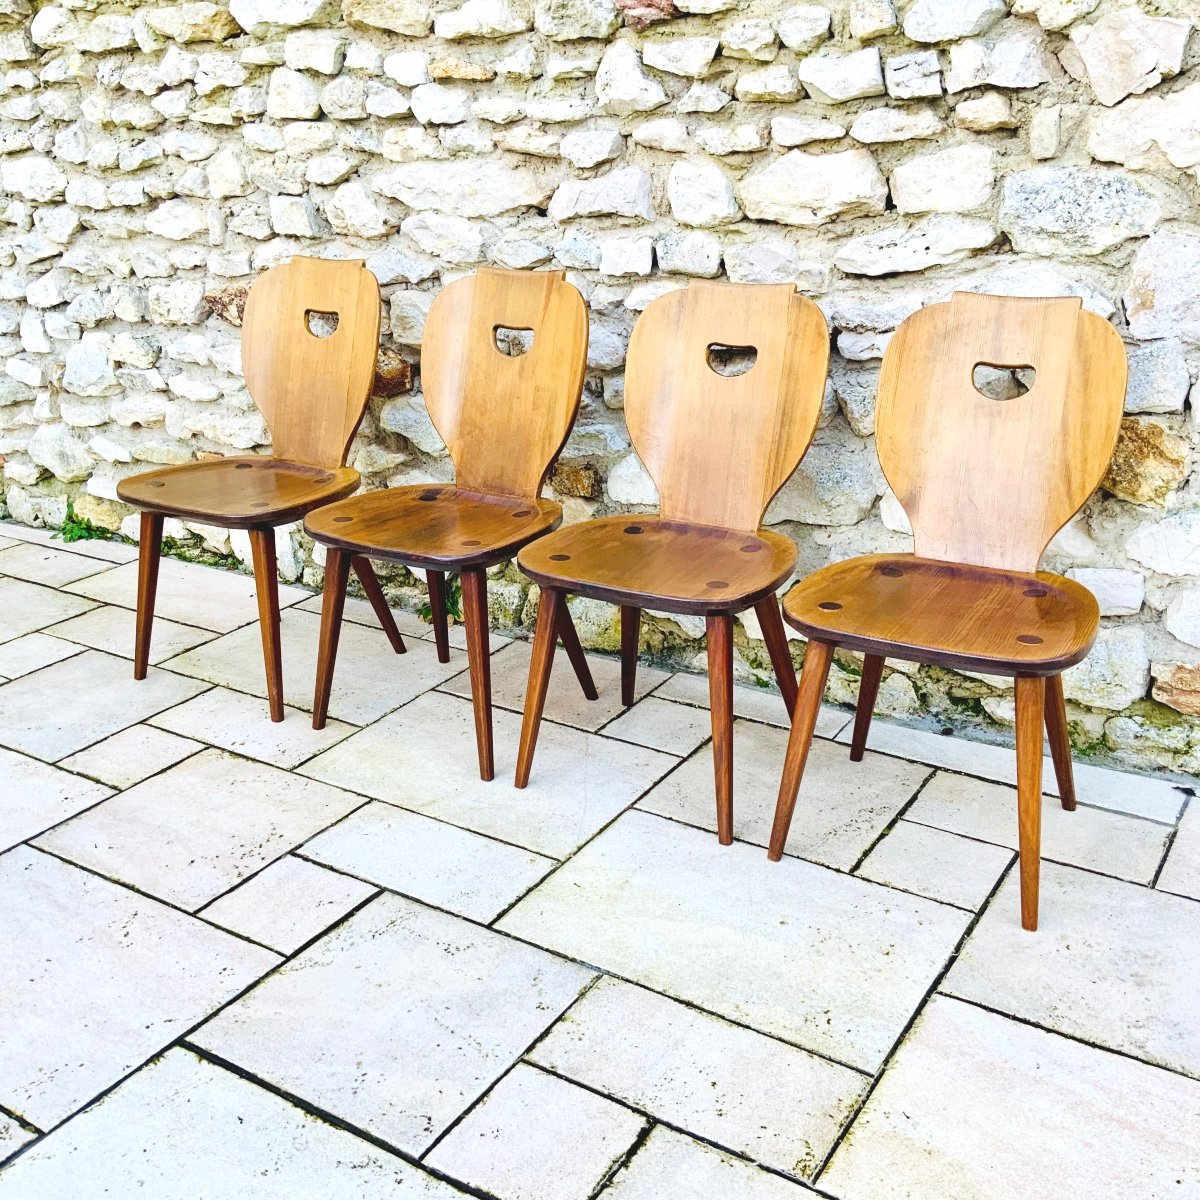 Series Of 4 Scandinavian Chairs 1950/60 By Carl Malmsten In Solid Pine, For Svensk…-photo-2